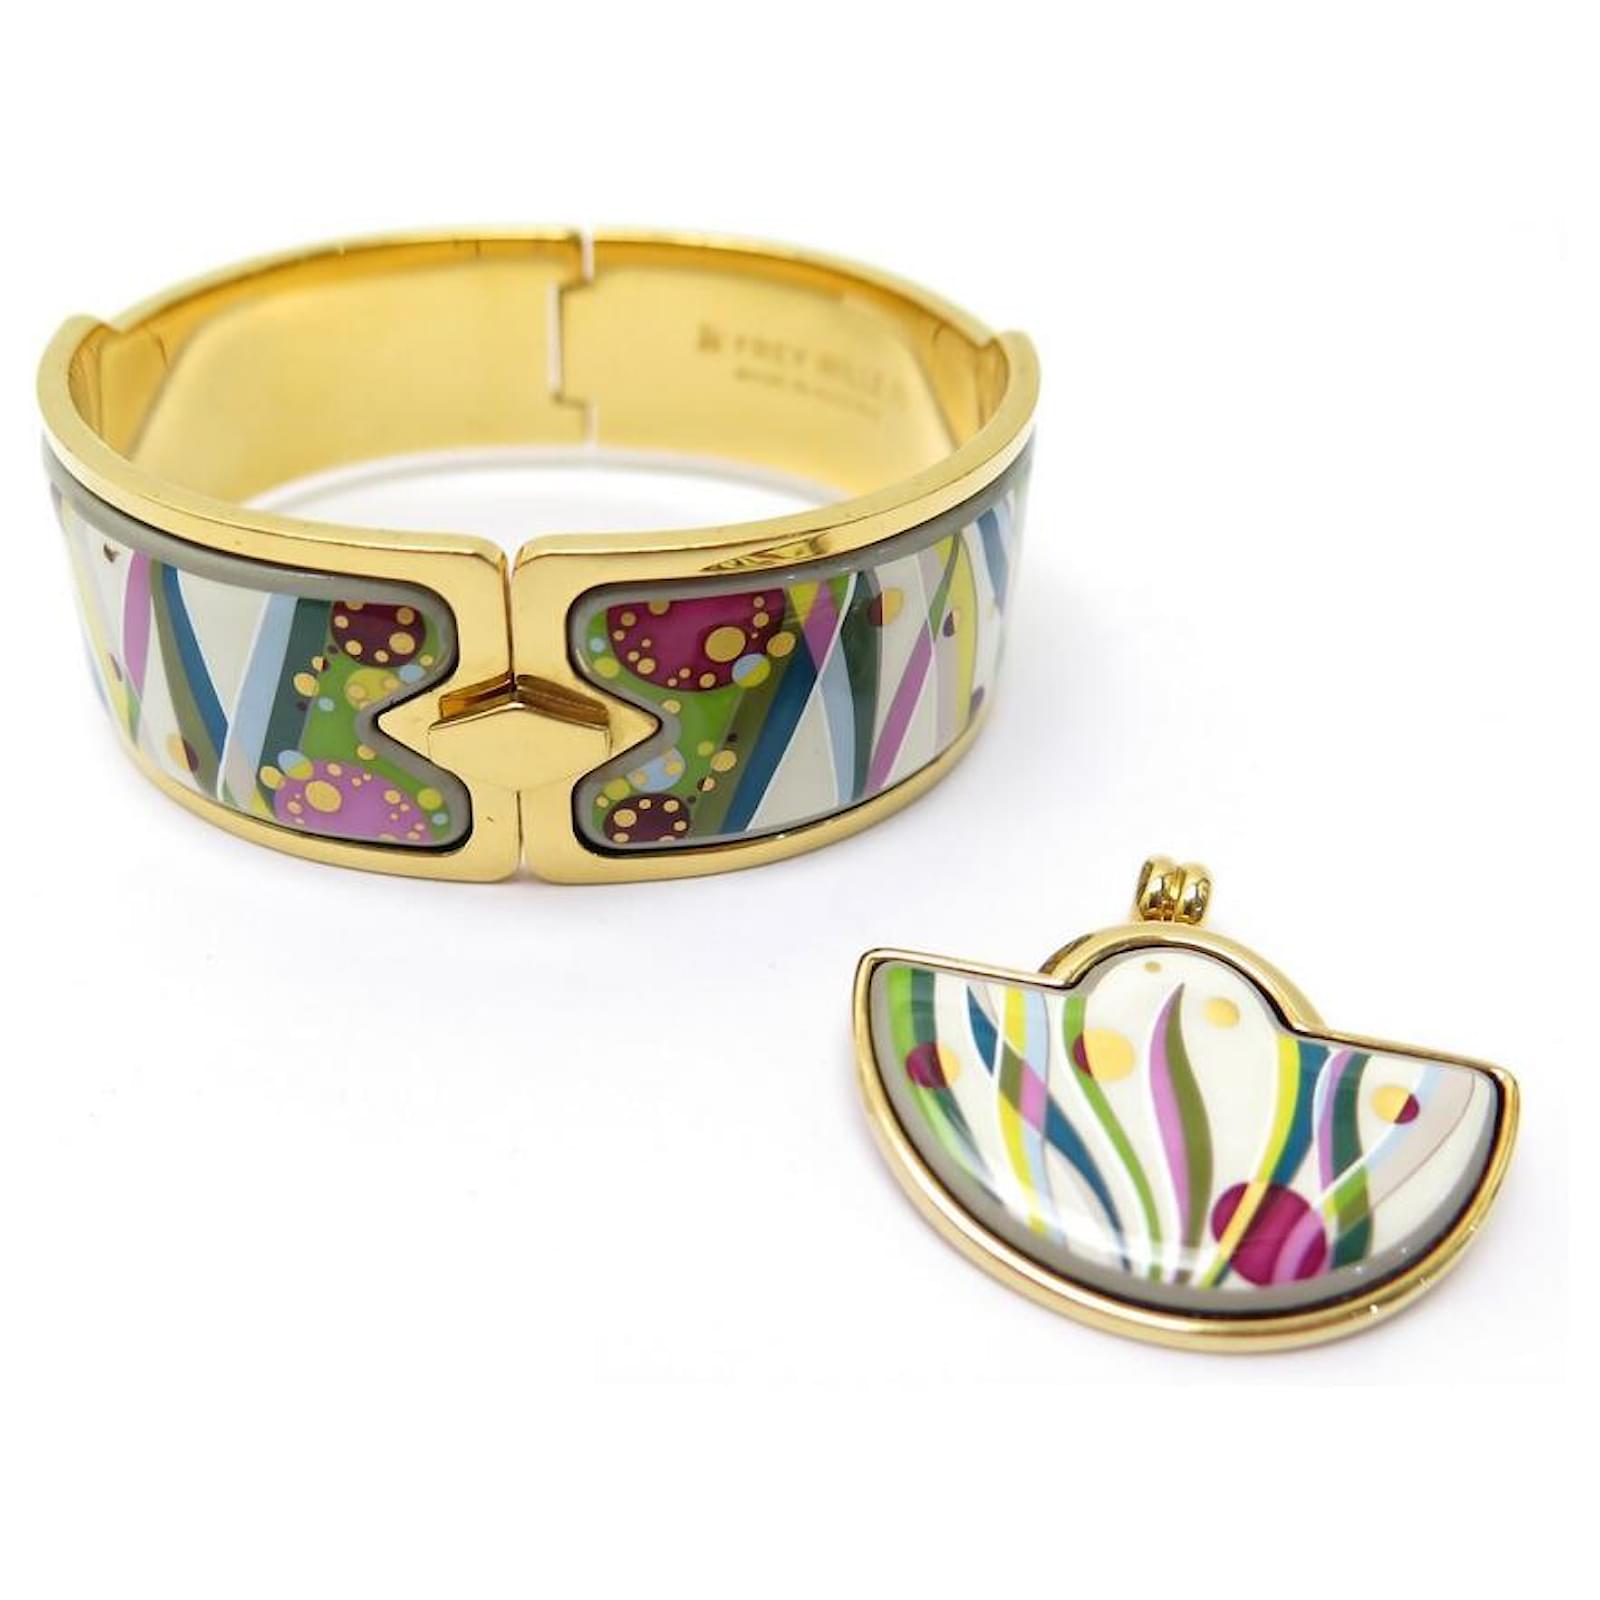 Austrian Enamel Jewelry brand- FREYWILLE Adds Russian and Auspicious  Elements - Magnifissance